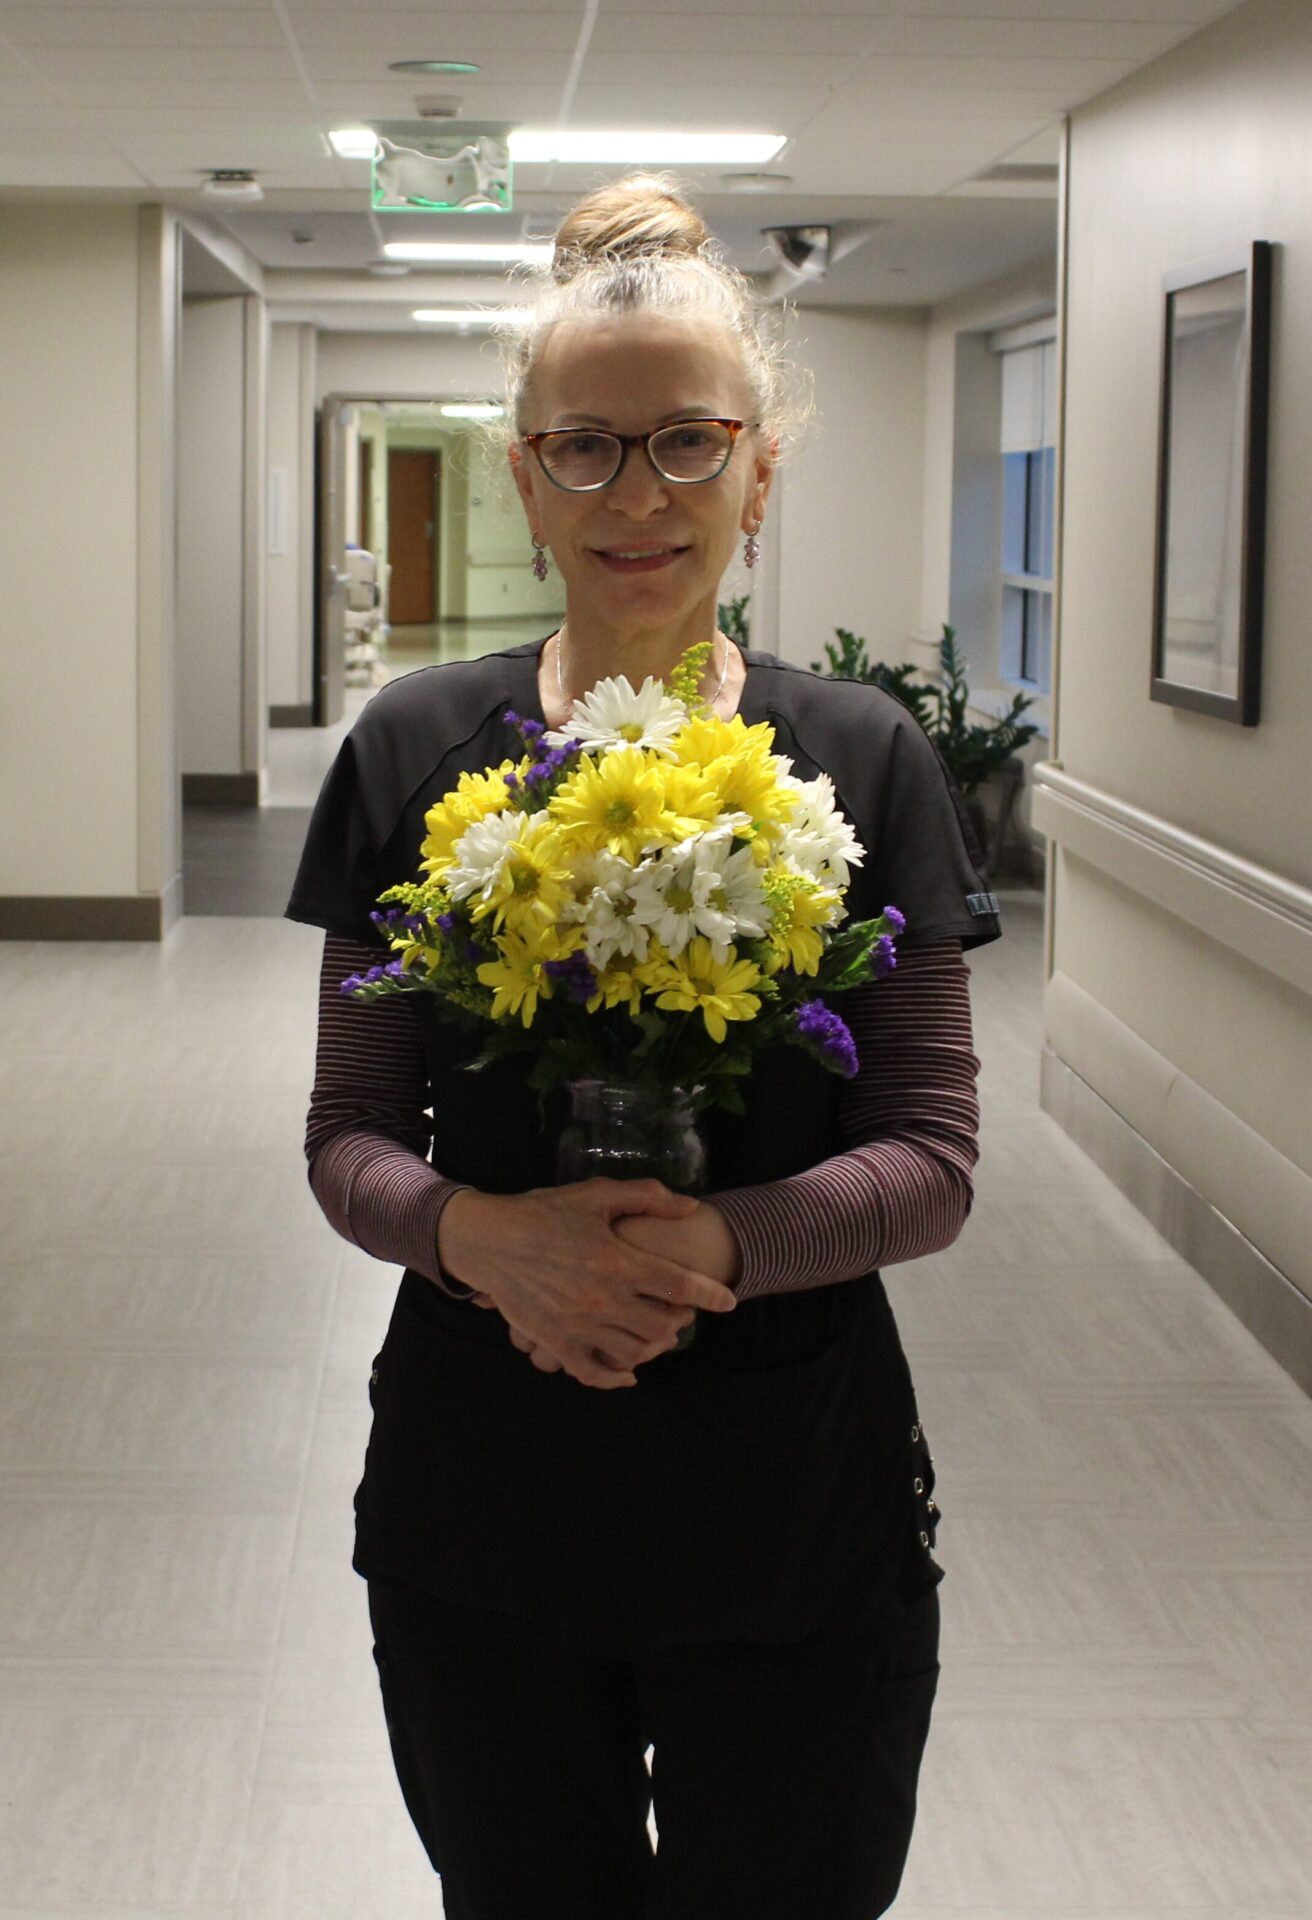 Tatyana pictured in a long hallway holding her beautiful DAISY flower arrangement.